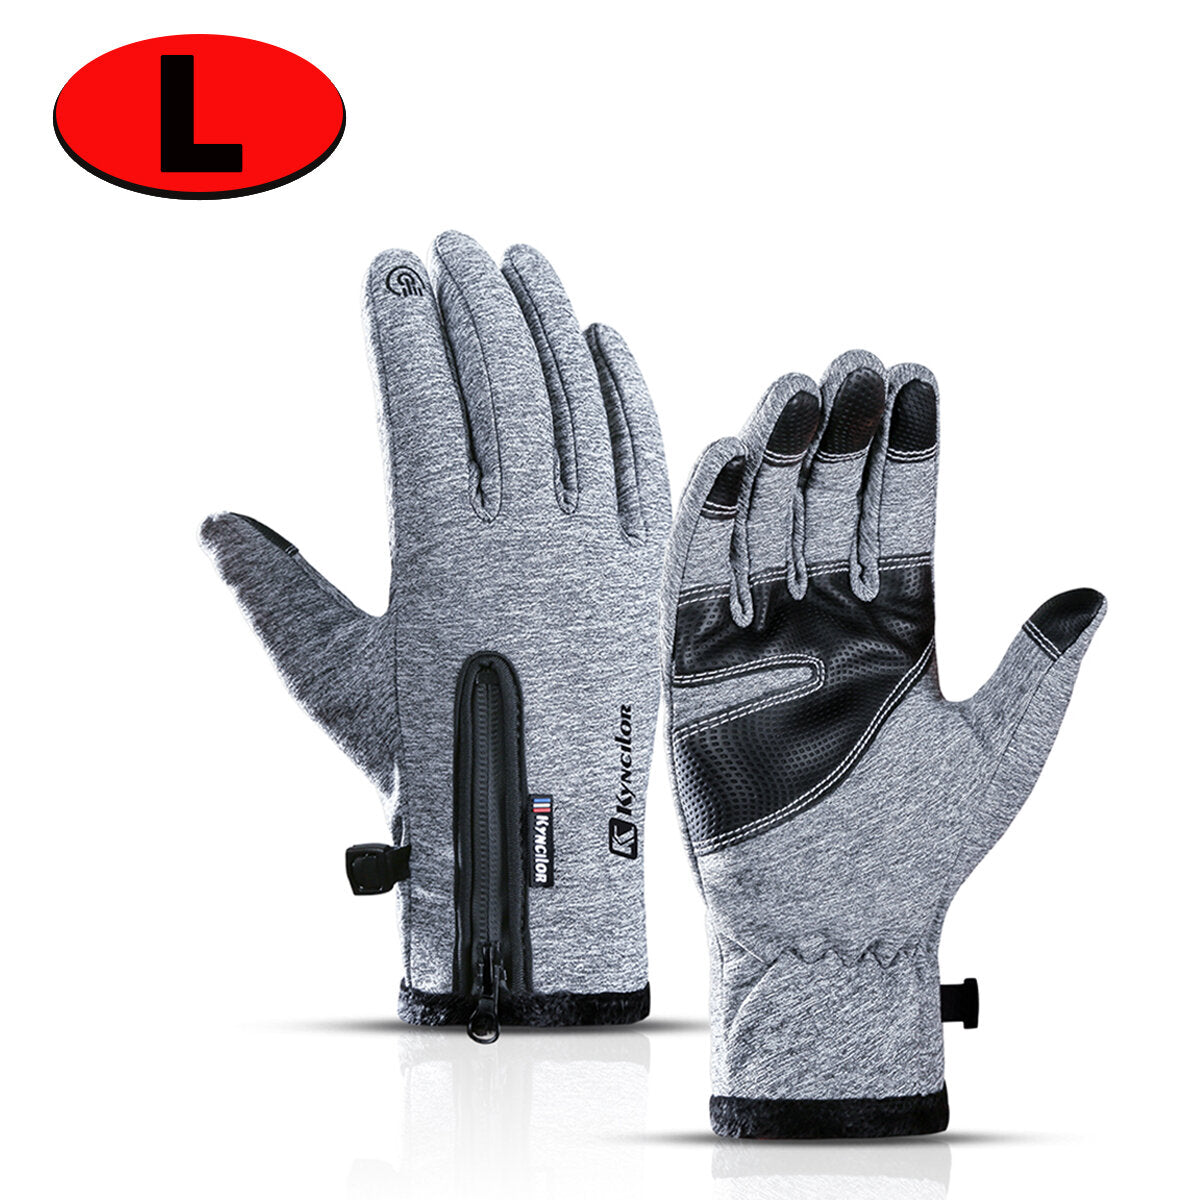 Winter Warm Windproof Waterproof Gloves Touch Screen Sports Gloves Ski Riding Bikes Motorcycle Gloves Touch Screen Gloves